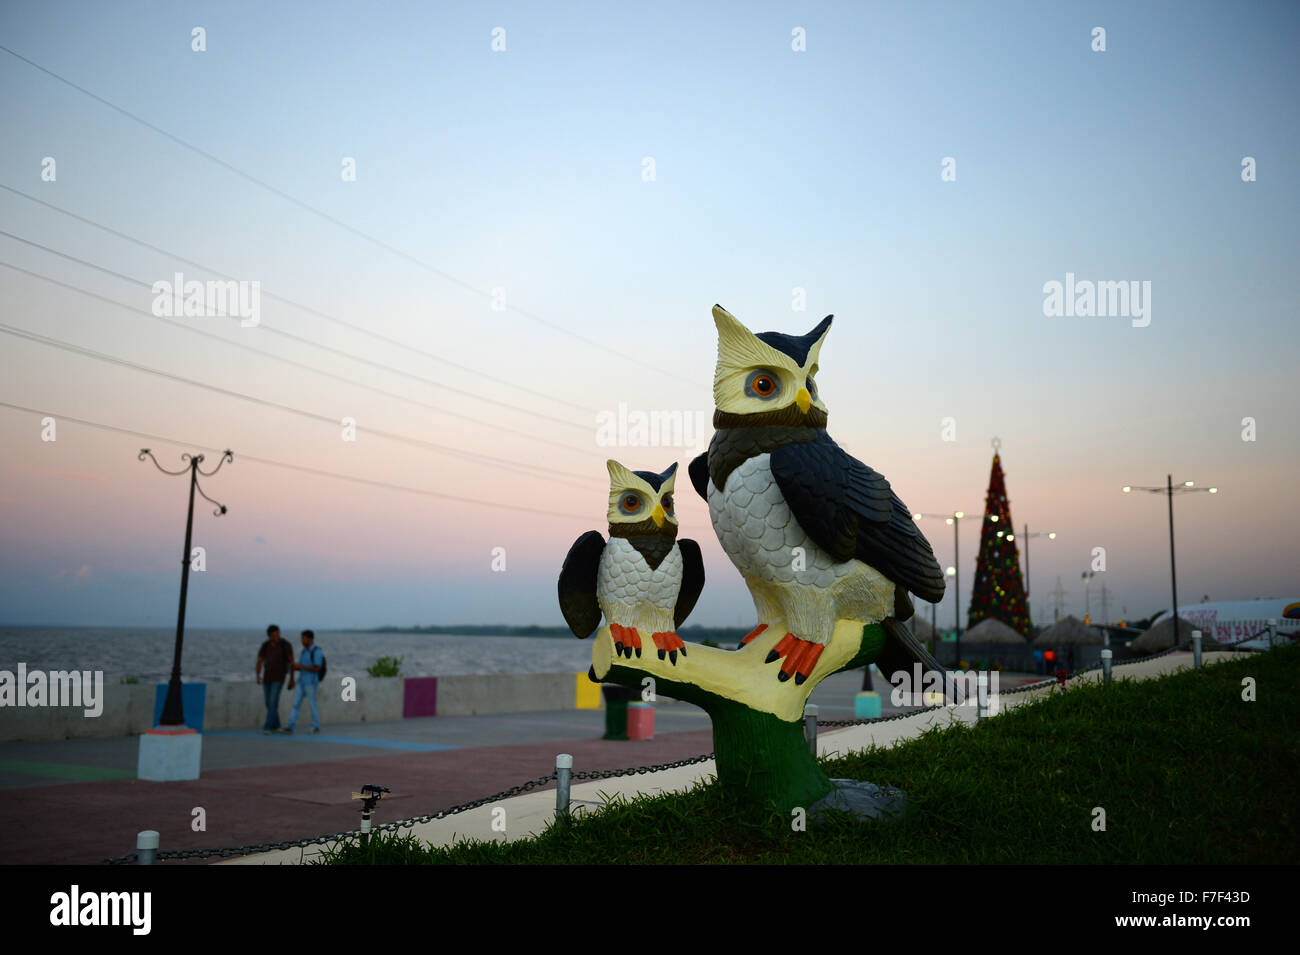 A sculpture depicting two owls is on display on the promenade of El Malecon at the Port Salvador Allende in Managua, Nicaragua, 27 November 2015. Photo: Jens Kalaene/dpa Stock Photo